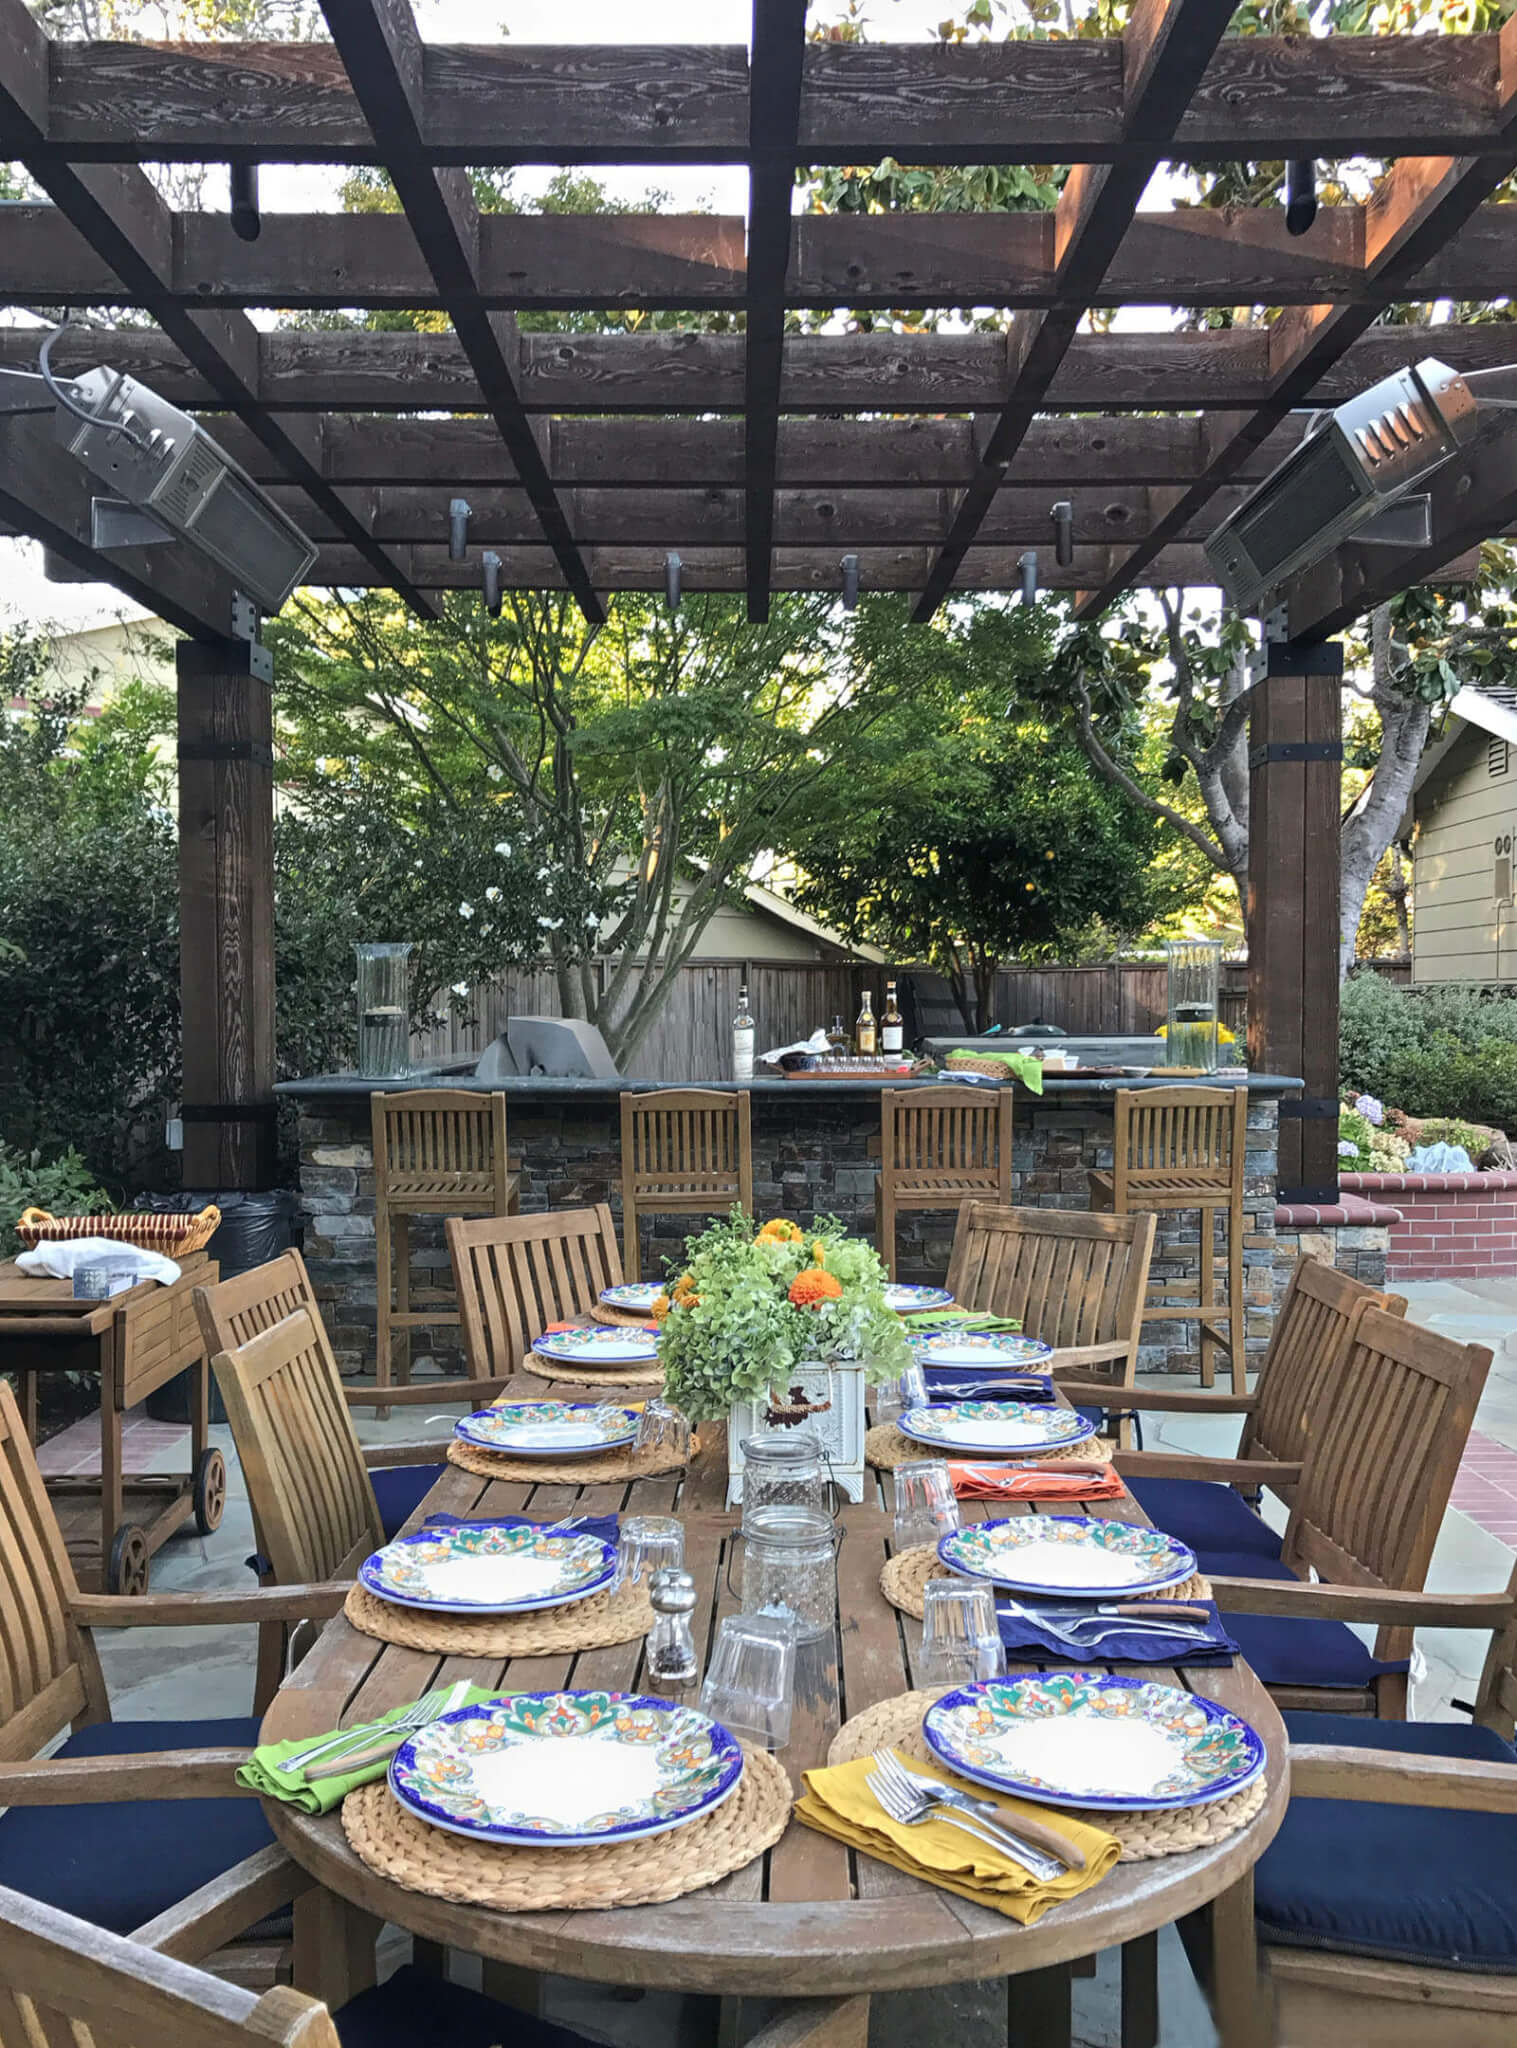 Outdoor dining area under pergola colorfully set for a summer dinner